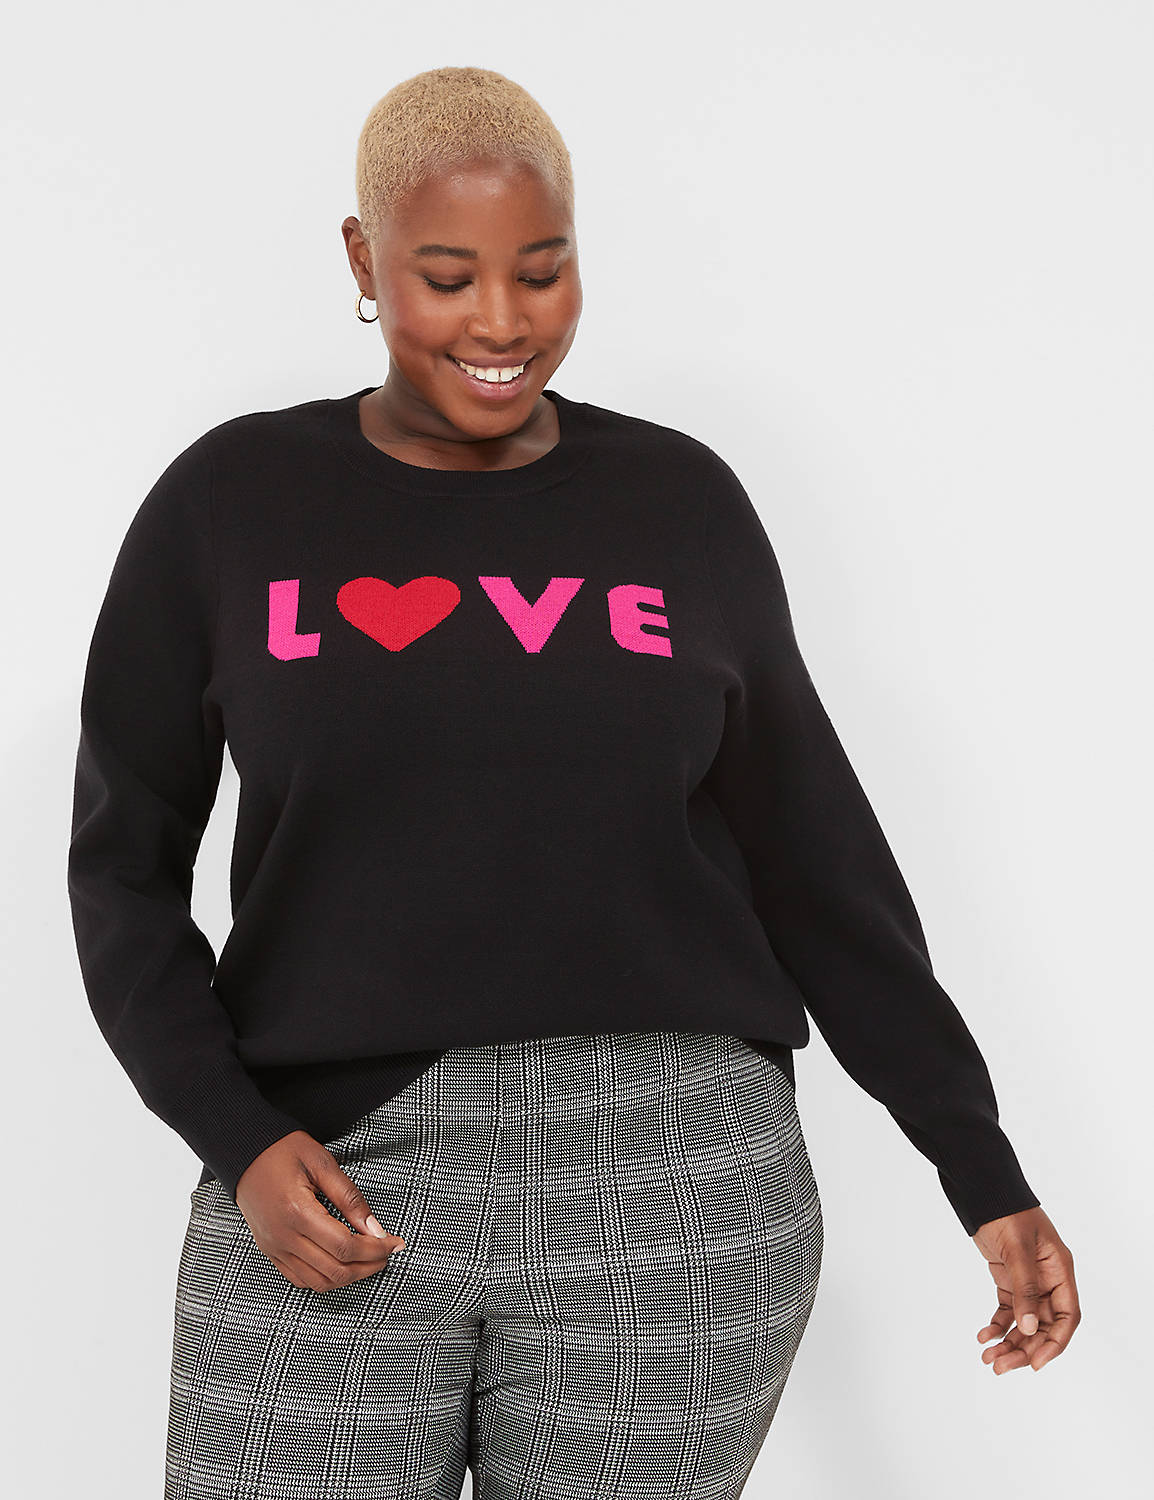 Classic Long Sleeve Crew Neck Amour Product Image 1